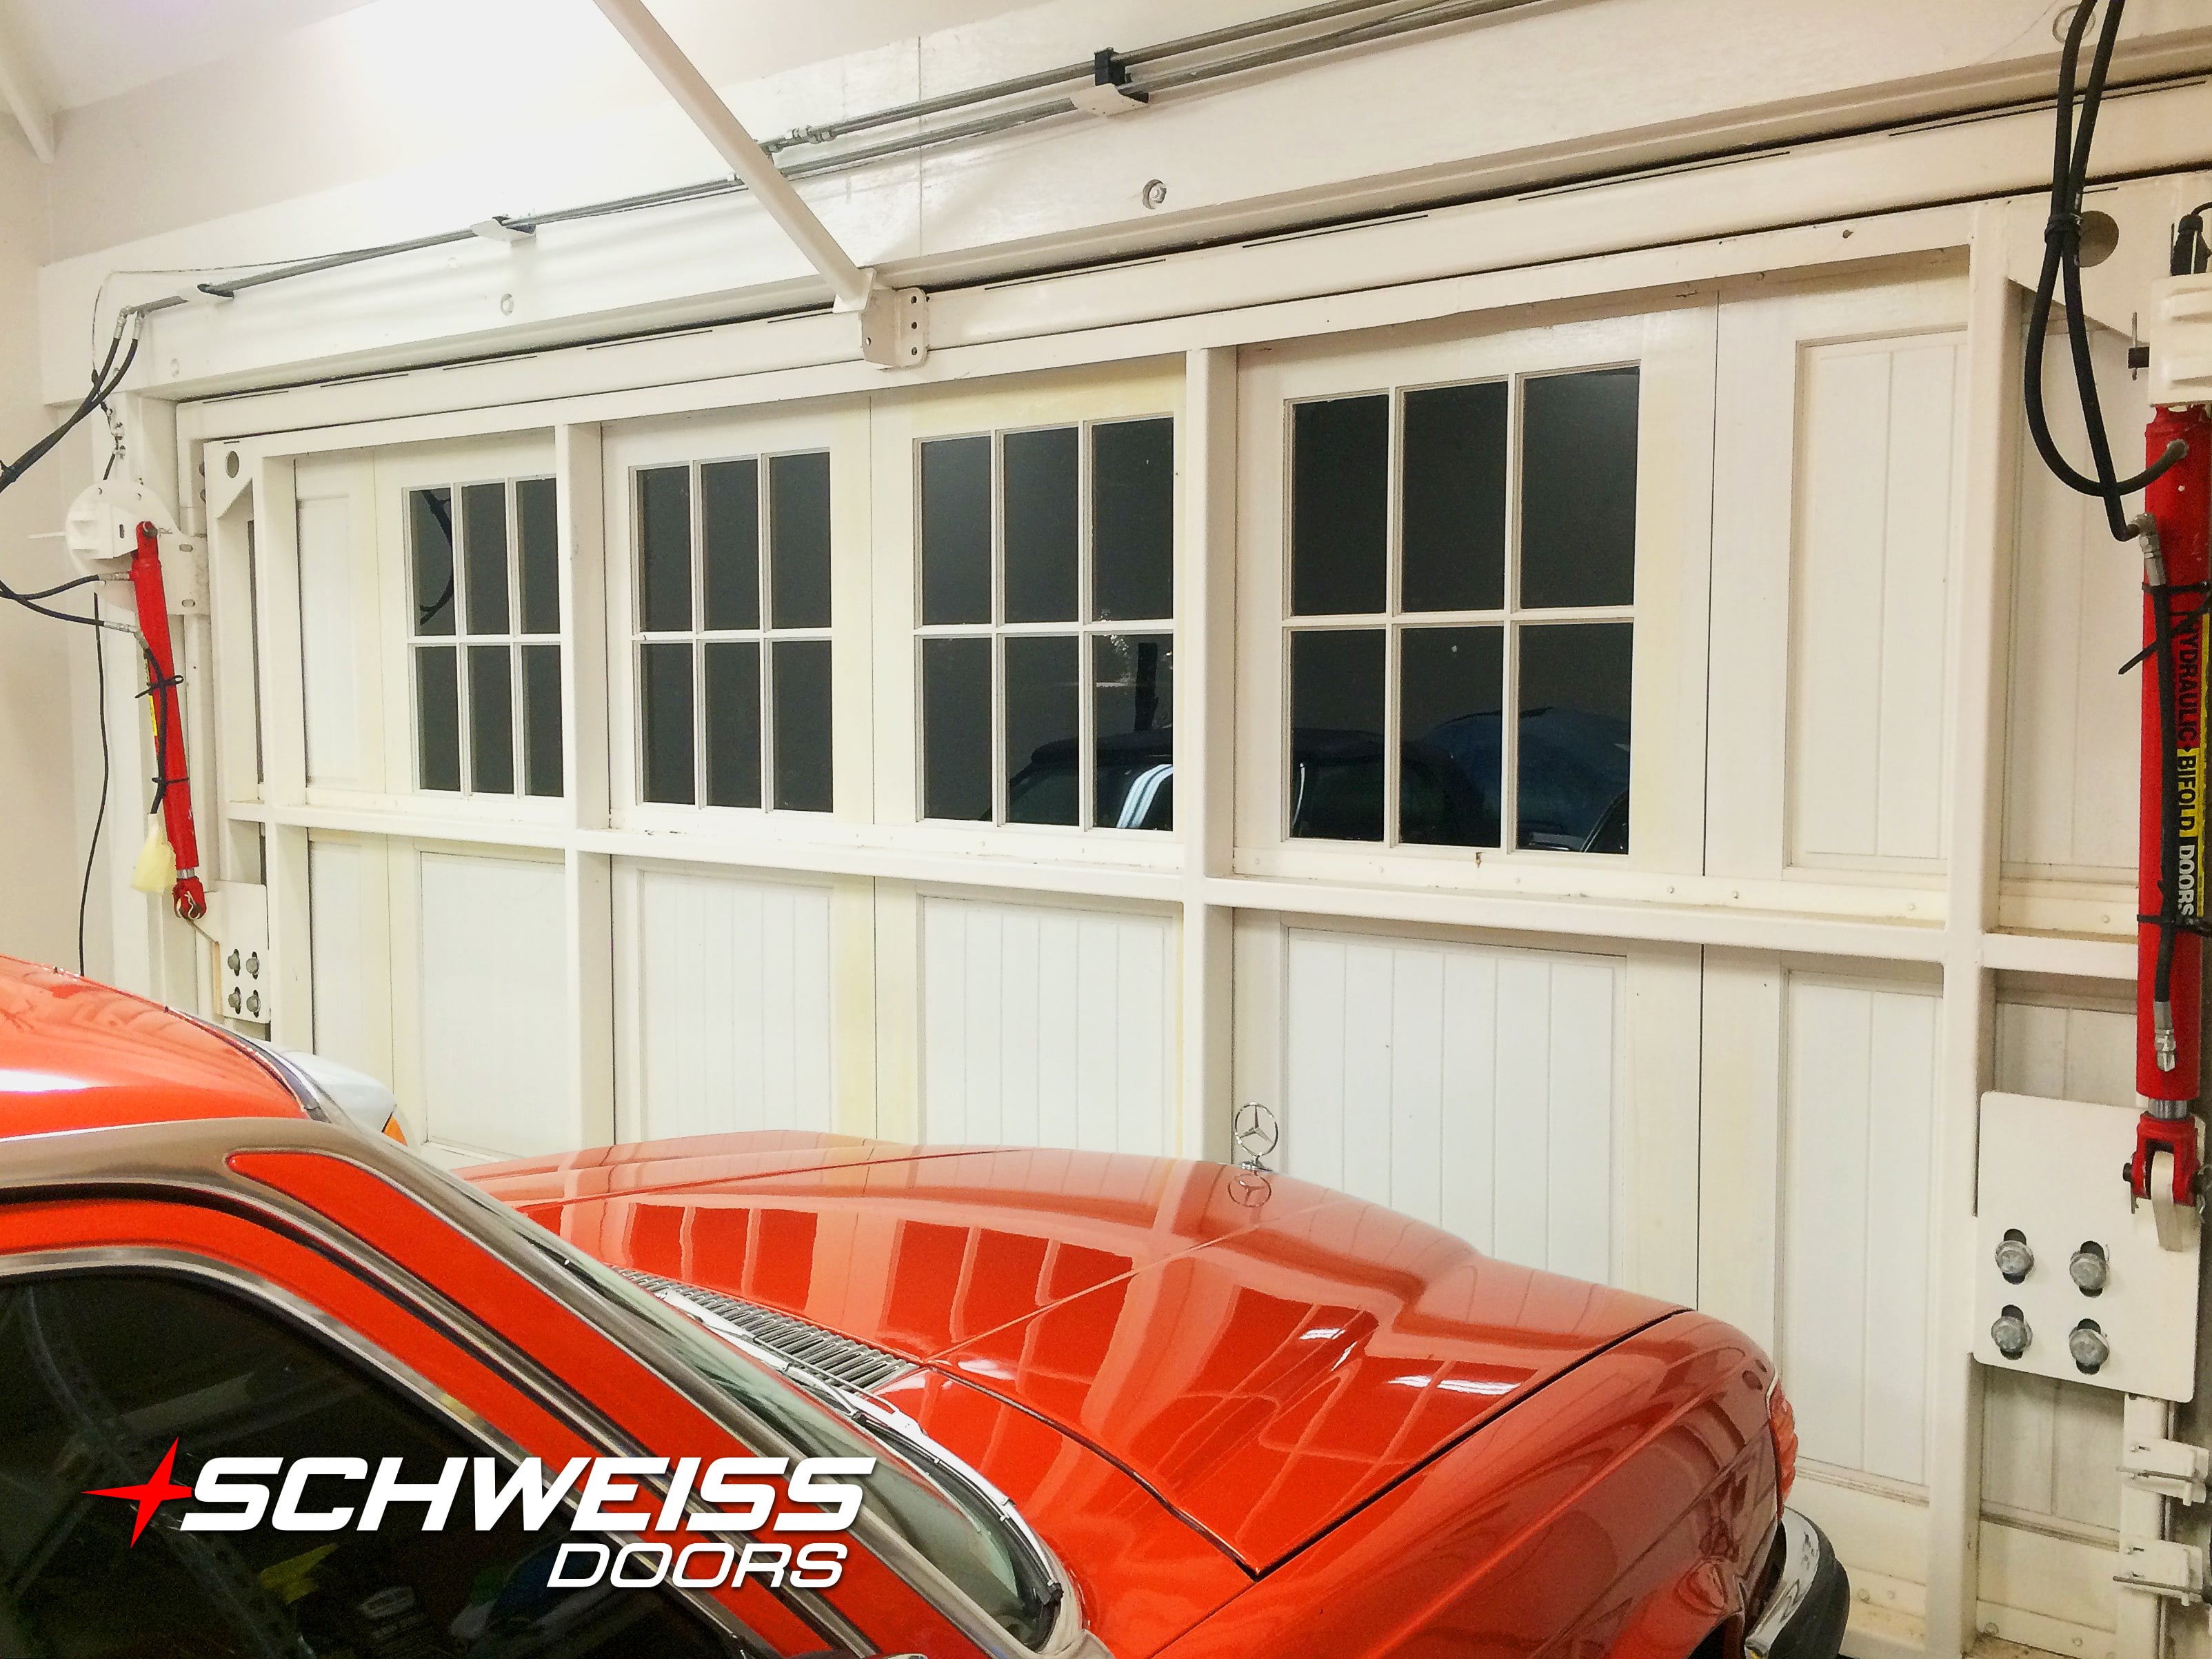 Schweiss One-Piece door was choose in order to install a car lift